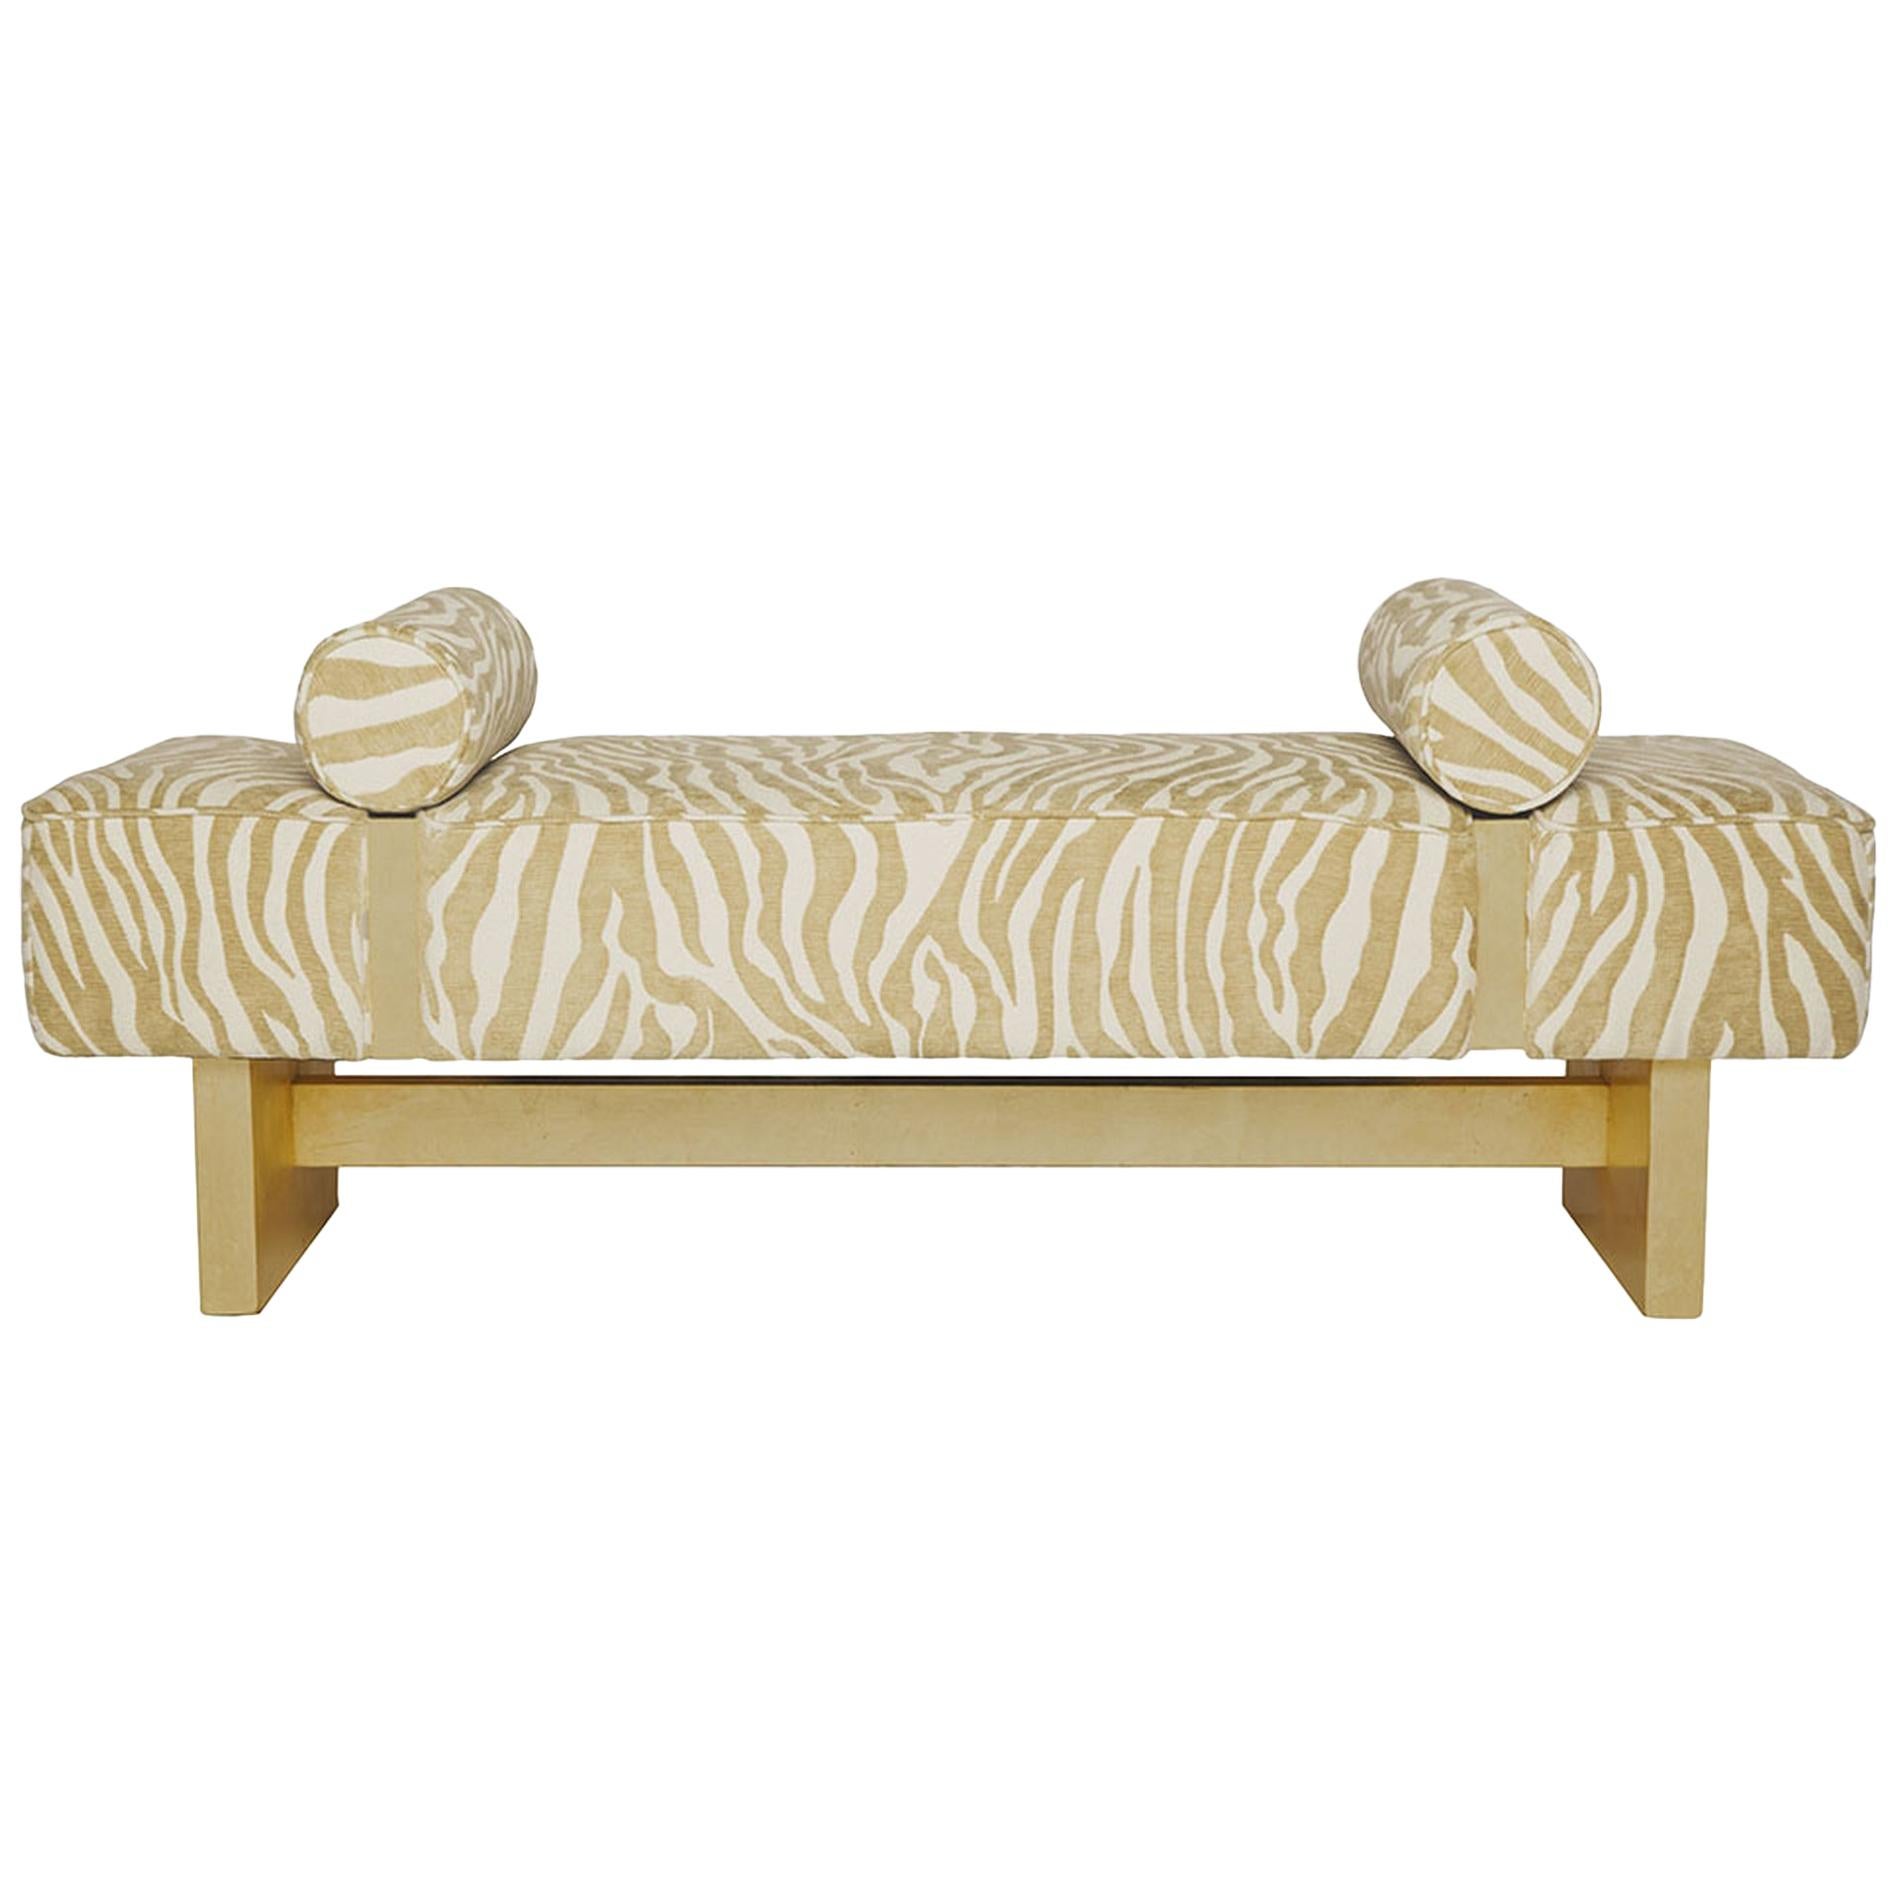 Casablanca Bench in Wood and Animal Print by Innova Luxuxy Group For Sale